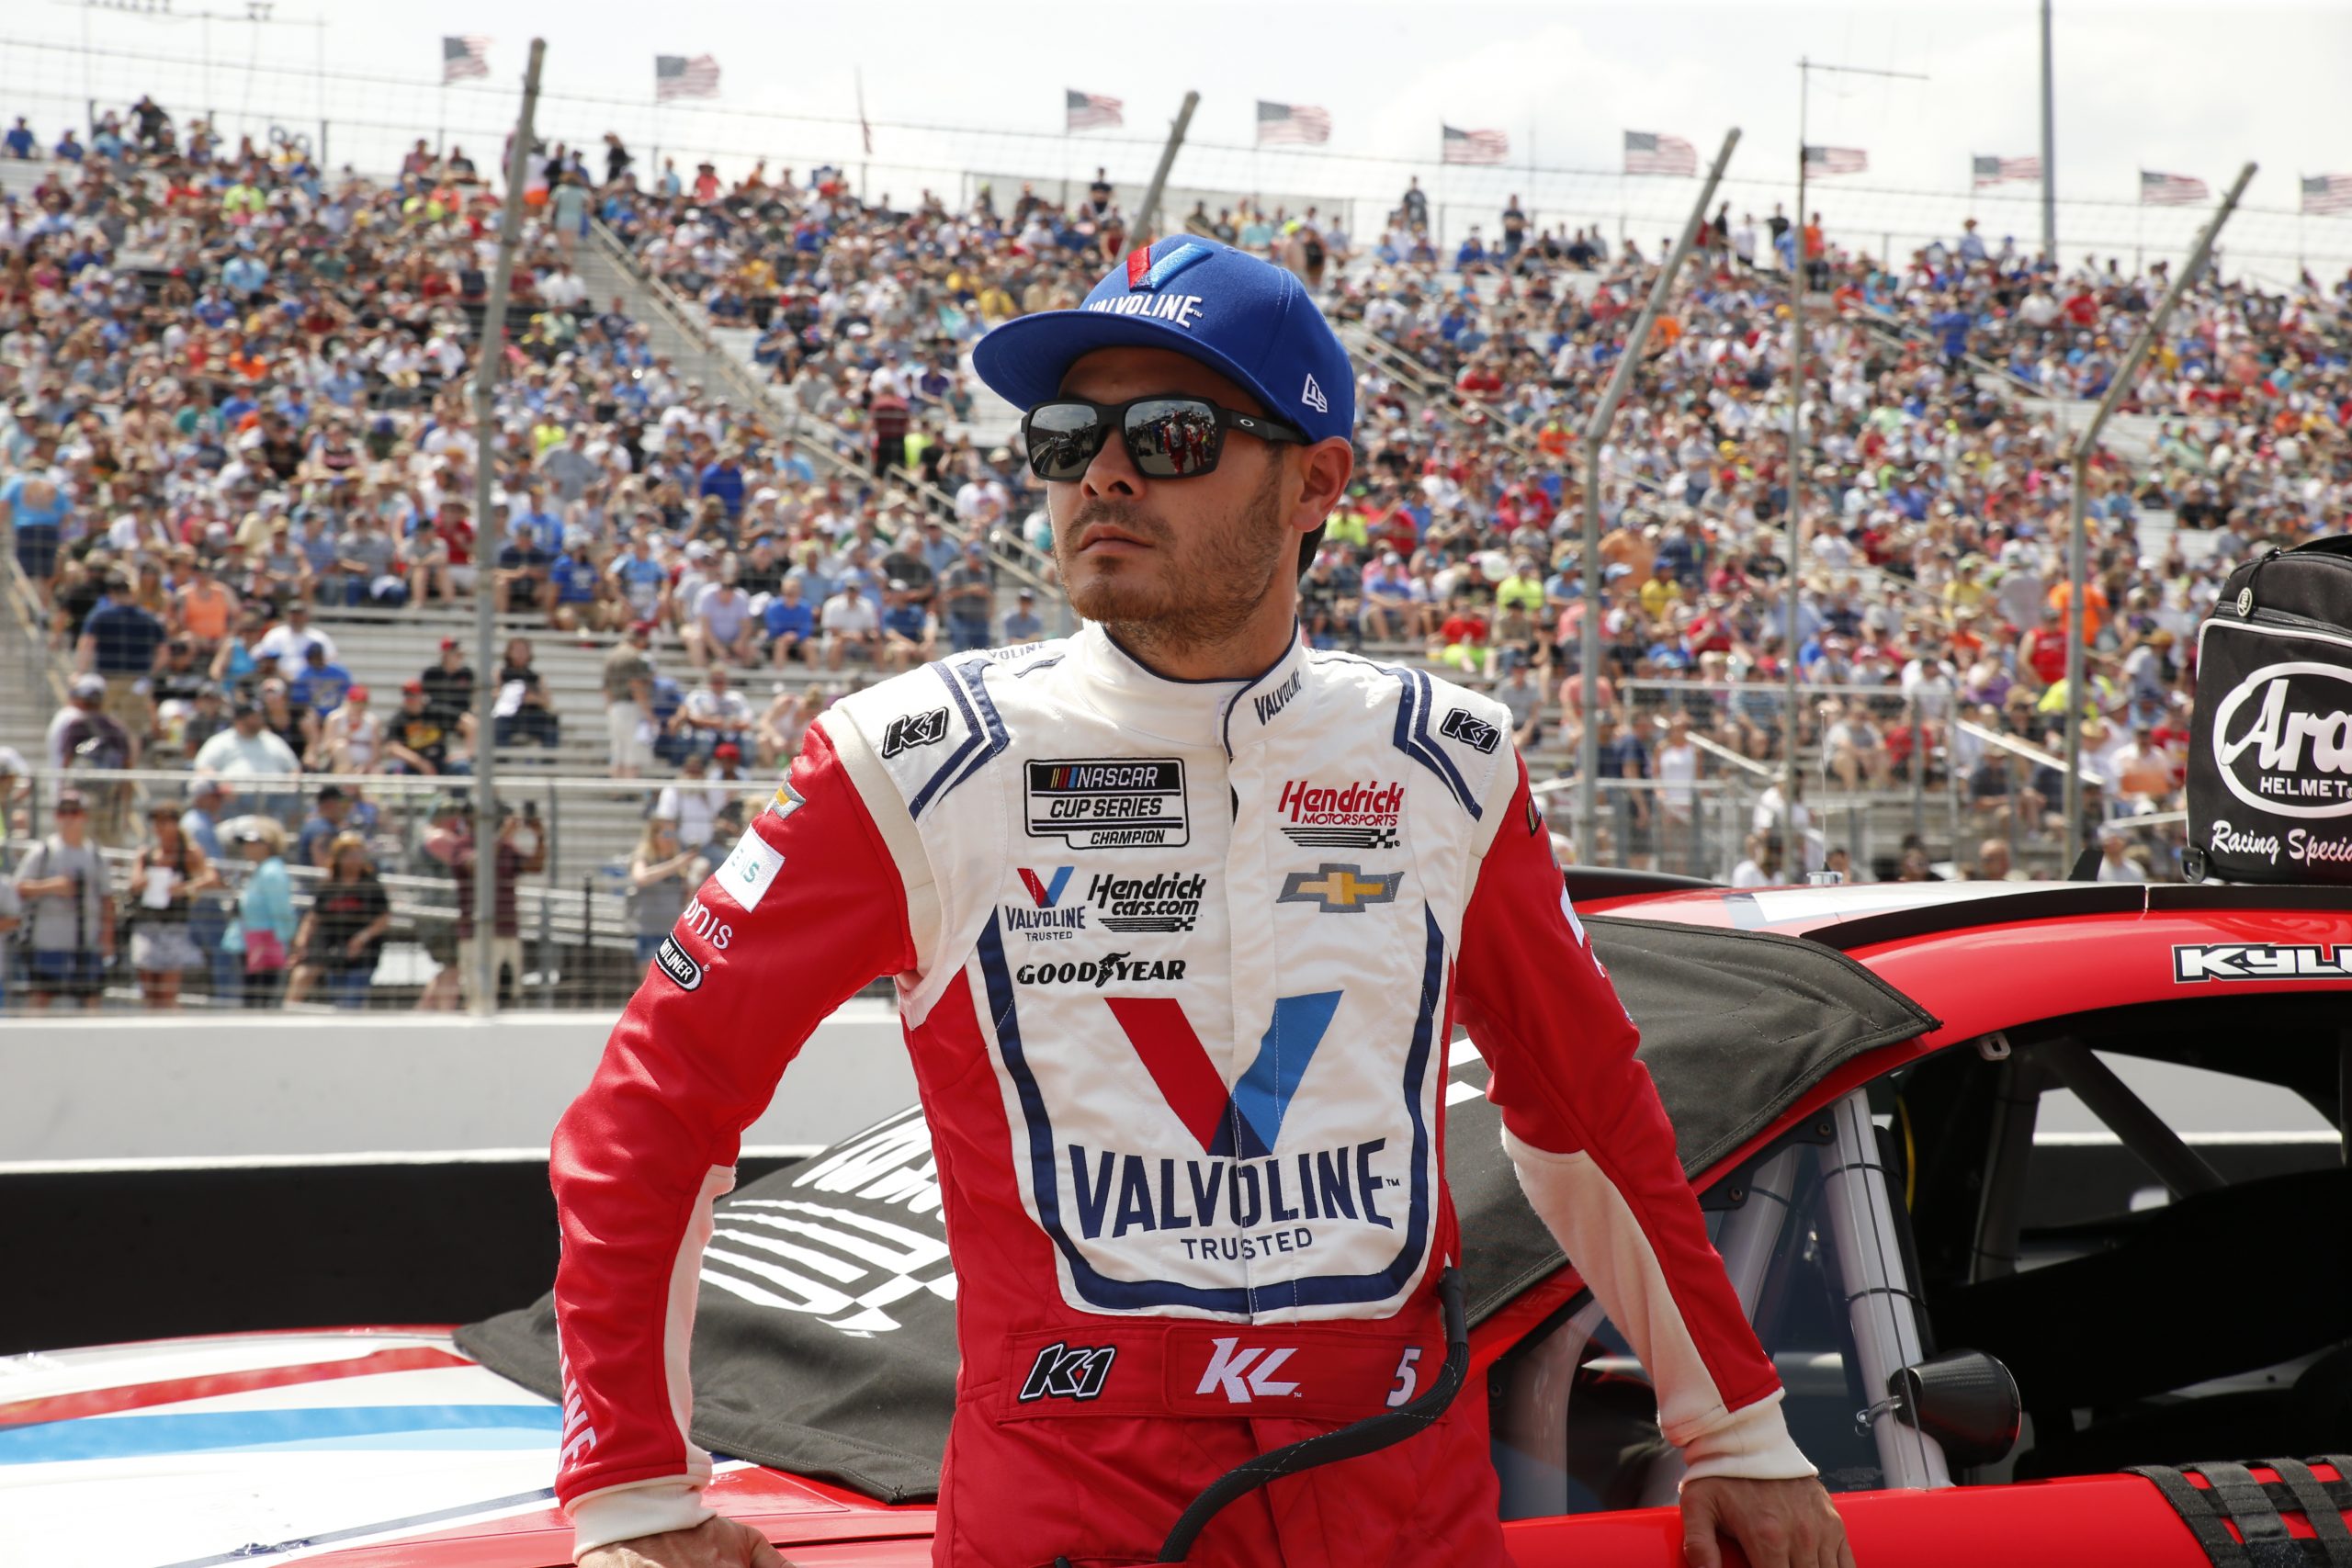 Kyle Larson would like to score a victory at Homestead-Miami for his No. 5 Valvoline Chevy team. (Photo: Stephen Conley | The Podium Finish)